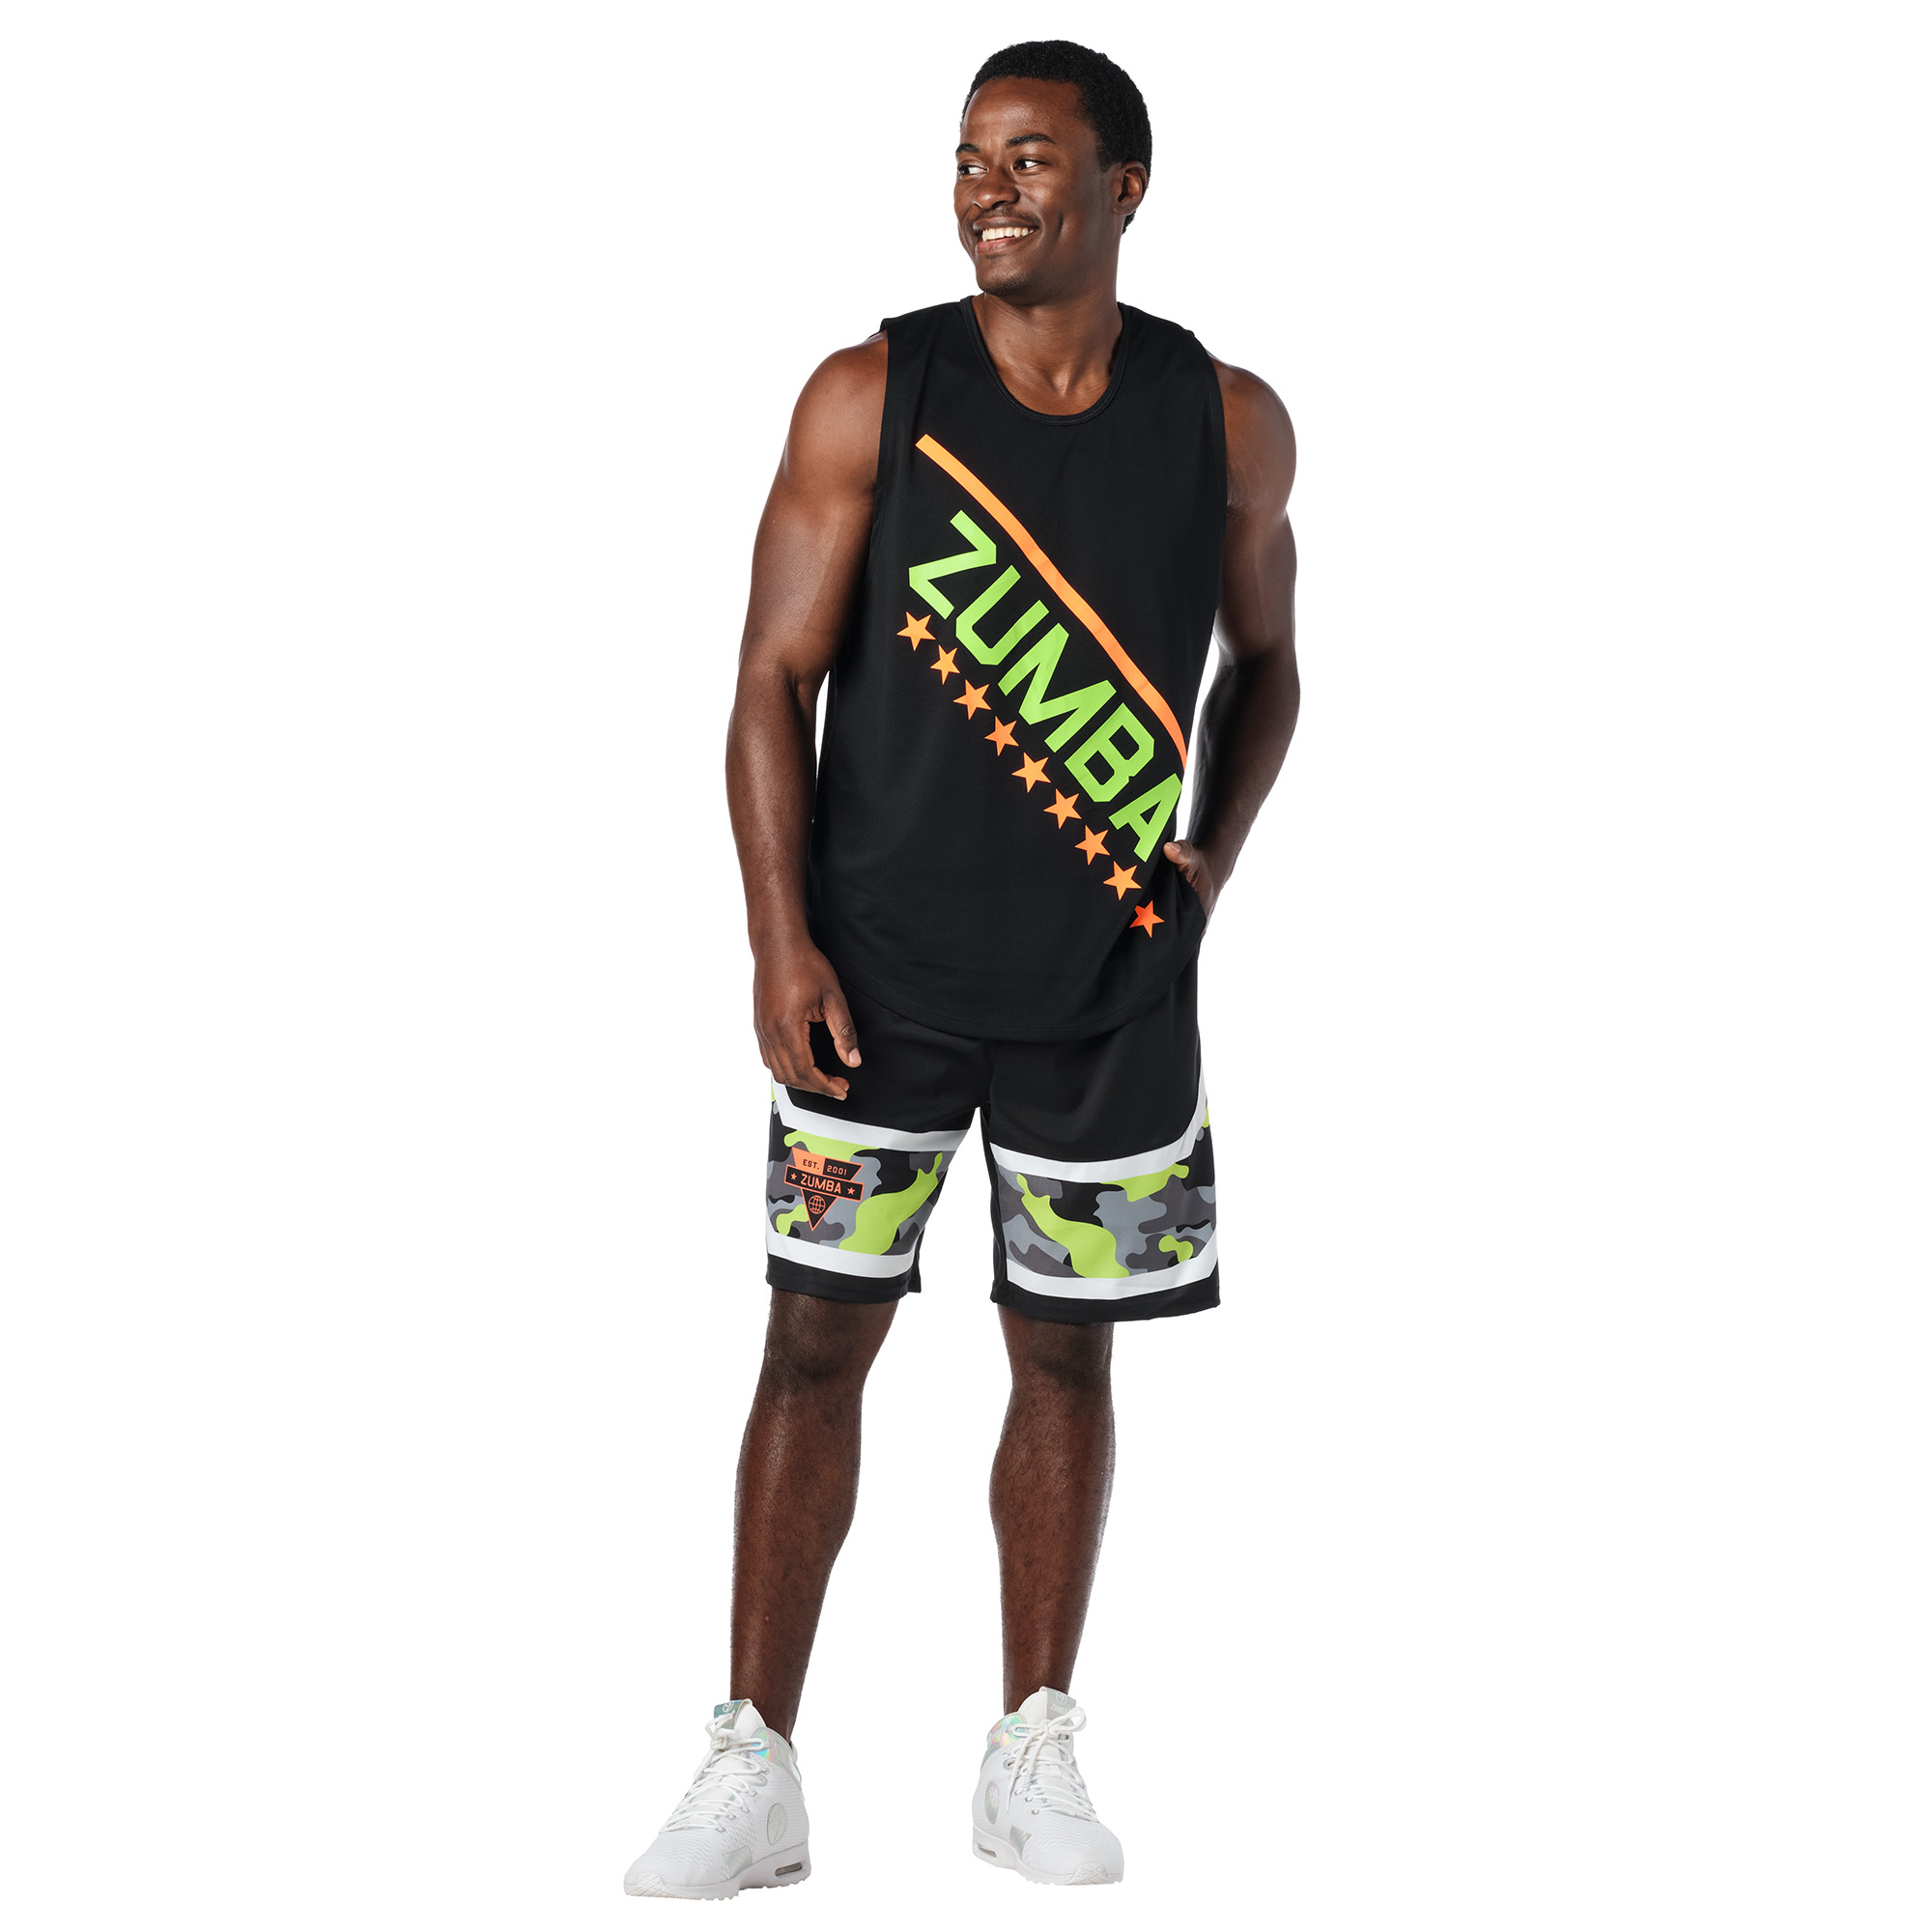 Zumba Now Men’s Tank – Latinfit Middle East